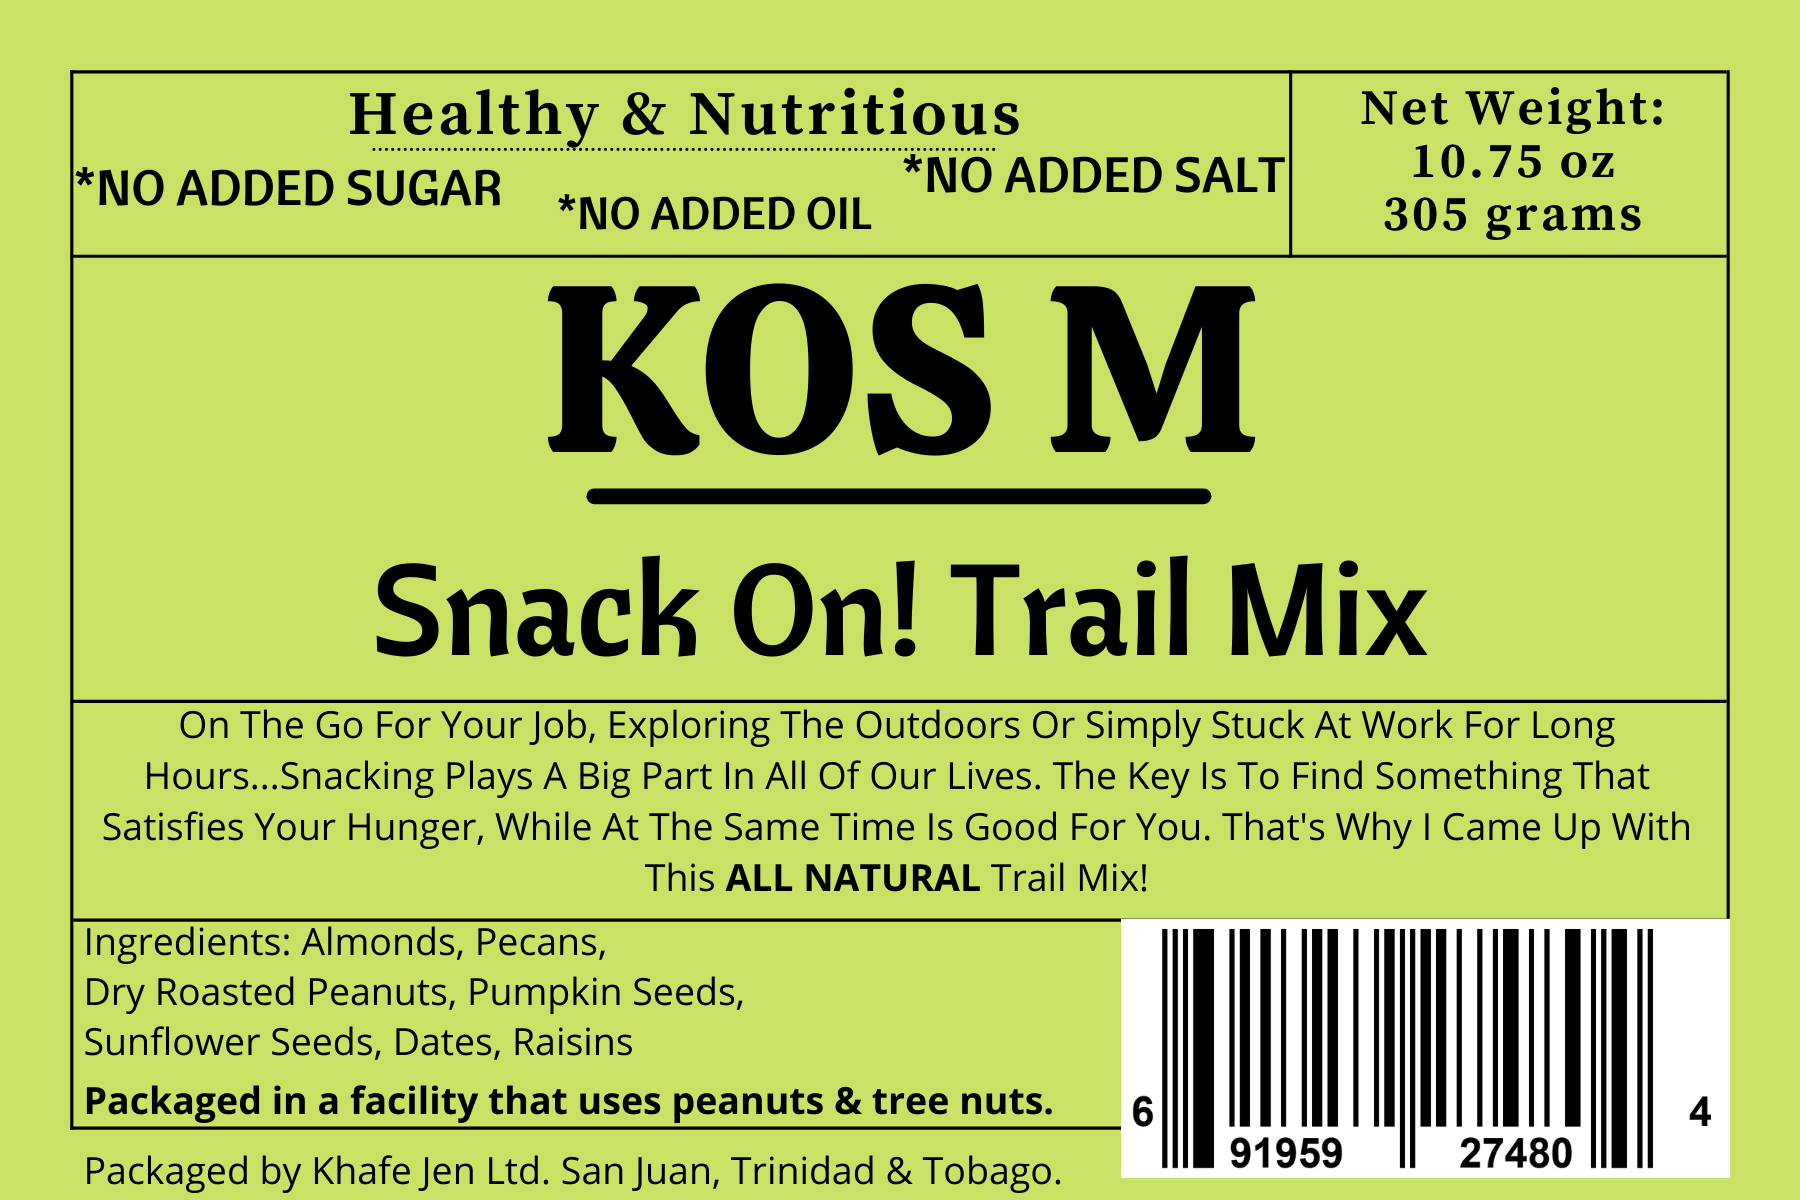 KoS M Snack On! Trail Mix (10.75 oz) (3 PACK)